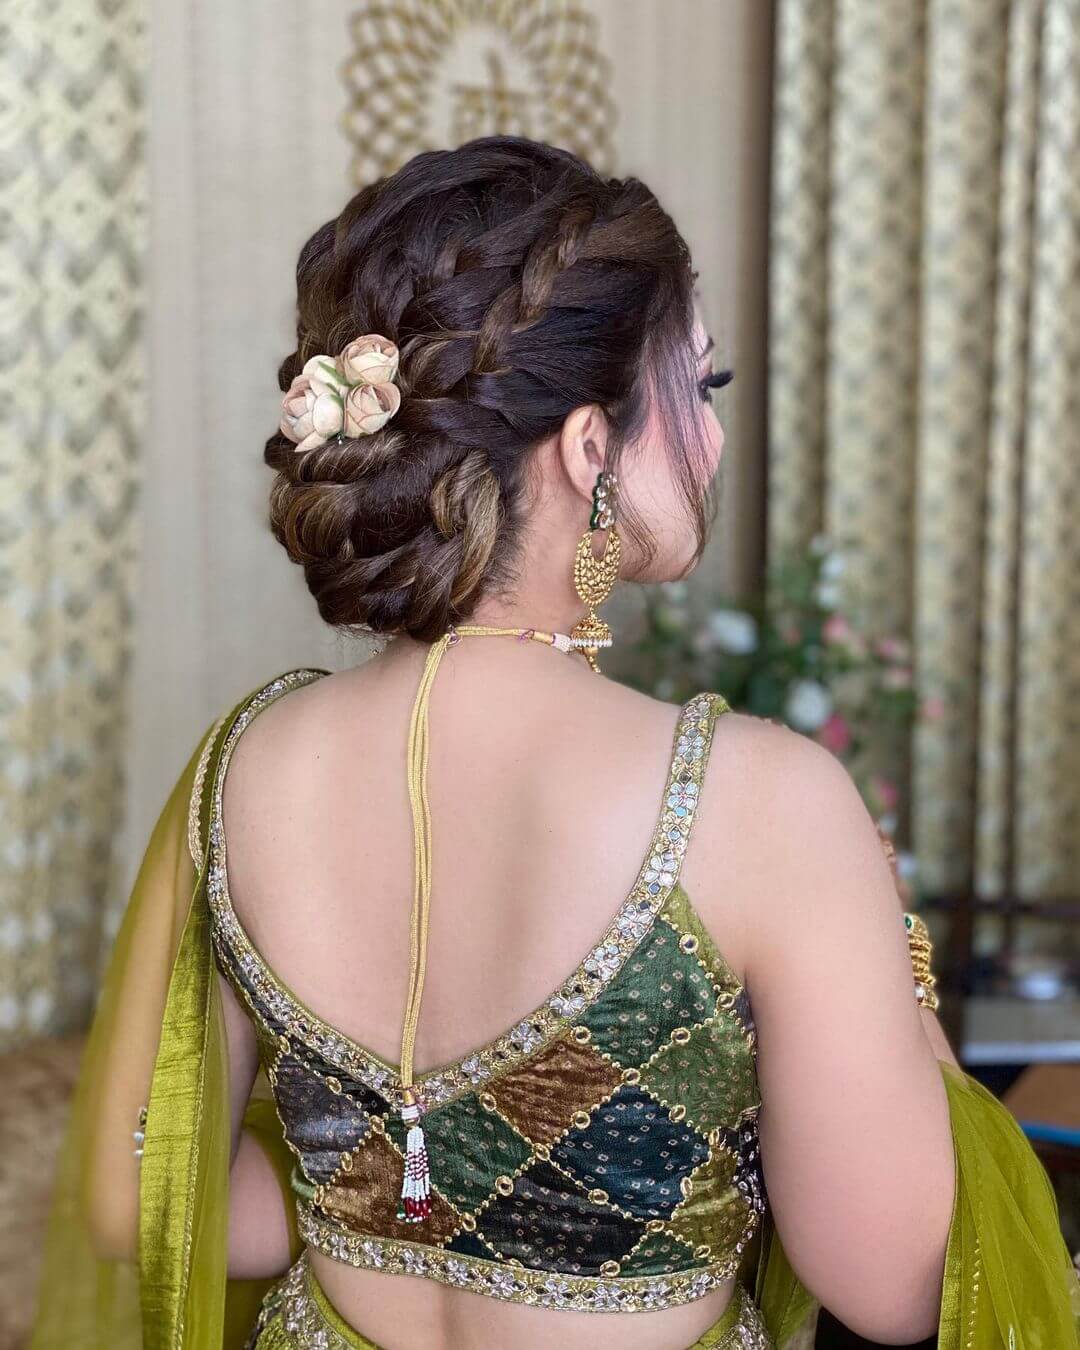 Alia Bhatt and Deepika Padukones Stylish Bun Hairstyles That You Would  Want To Copy For Your Saree Look  IWMBuzz